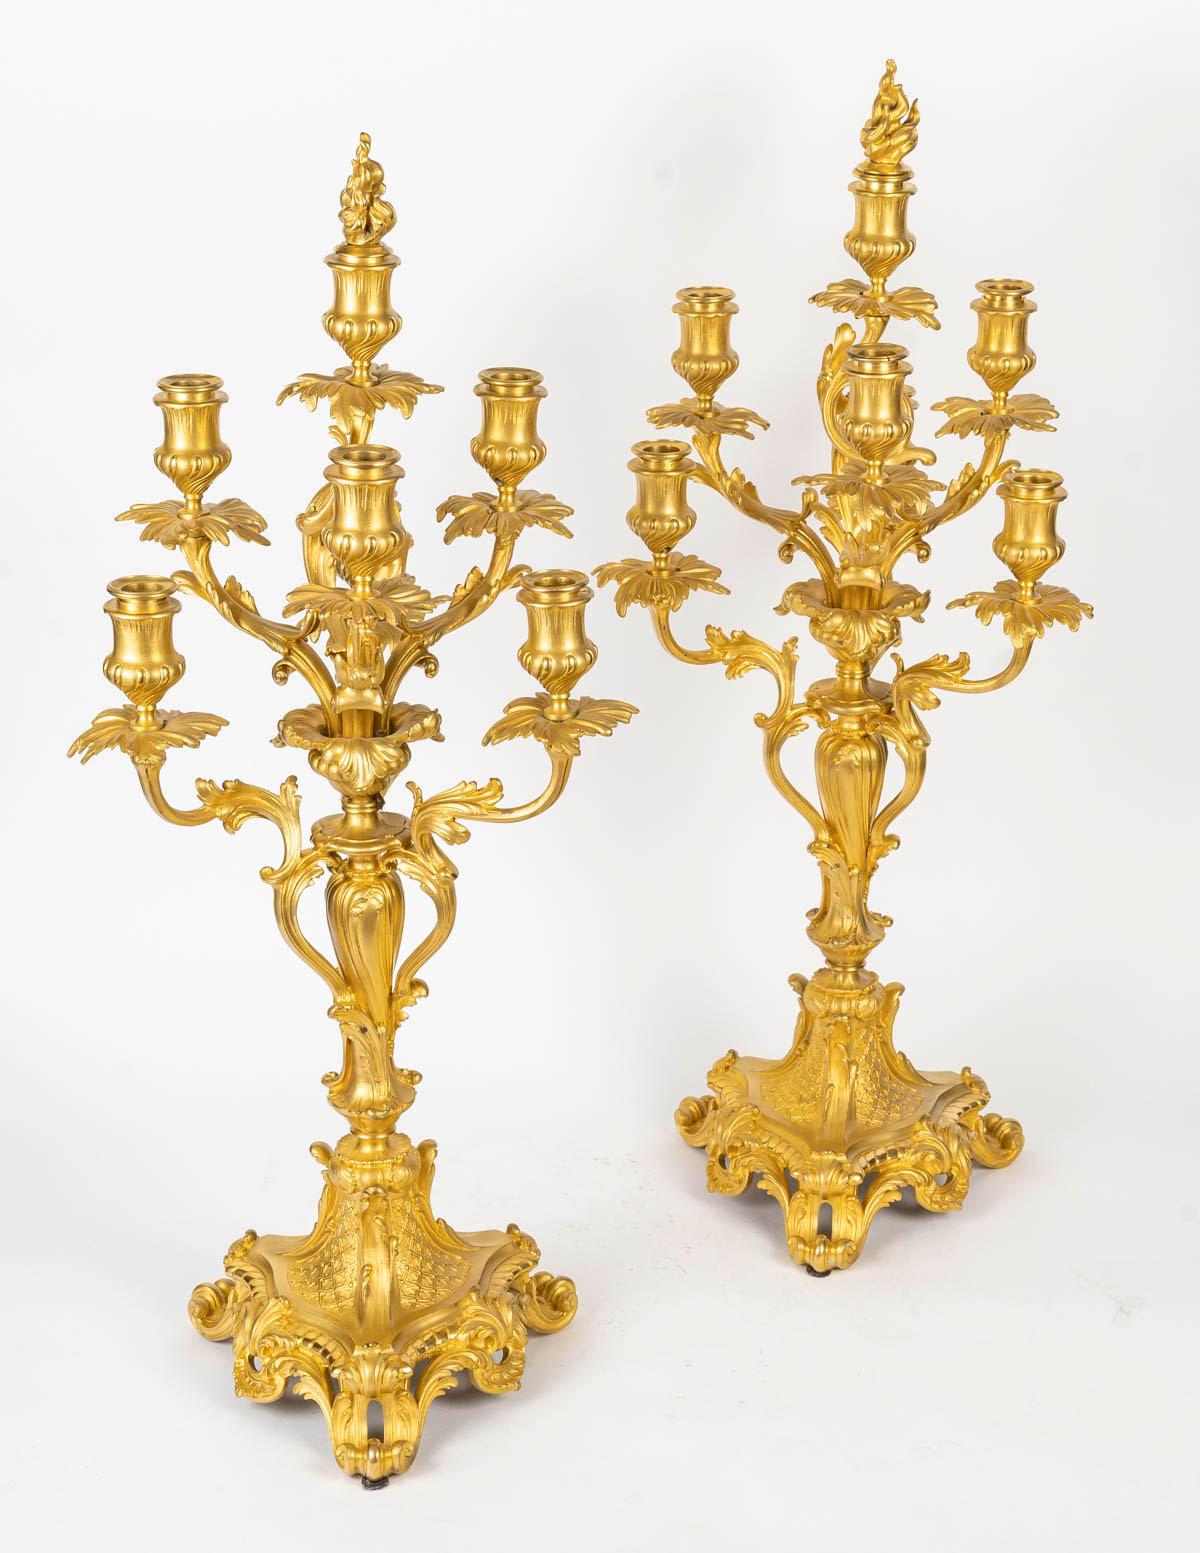 A Large Pair of Louis XV Style Gilt Bronze Candelabra, Signed Barbedienne. For Sale 2